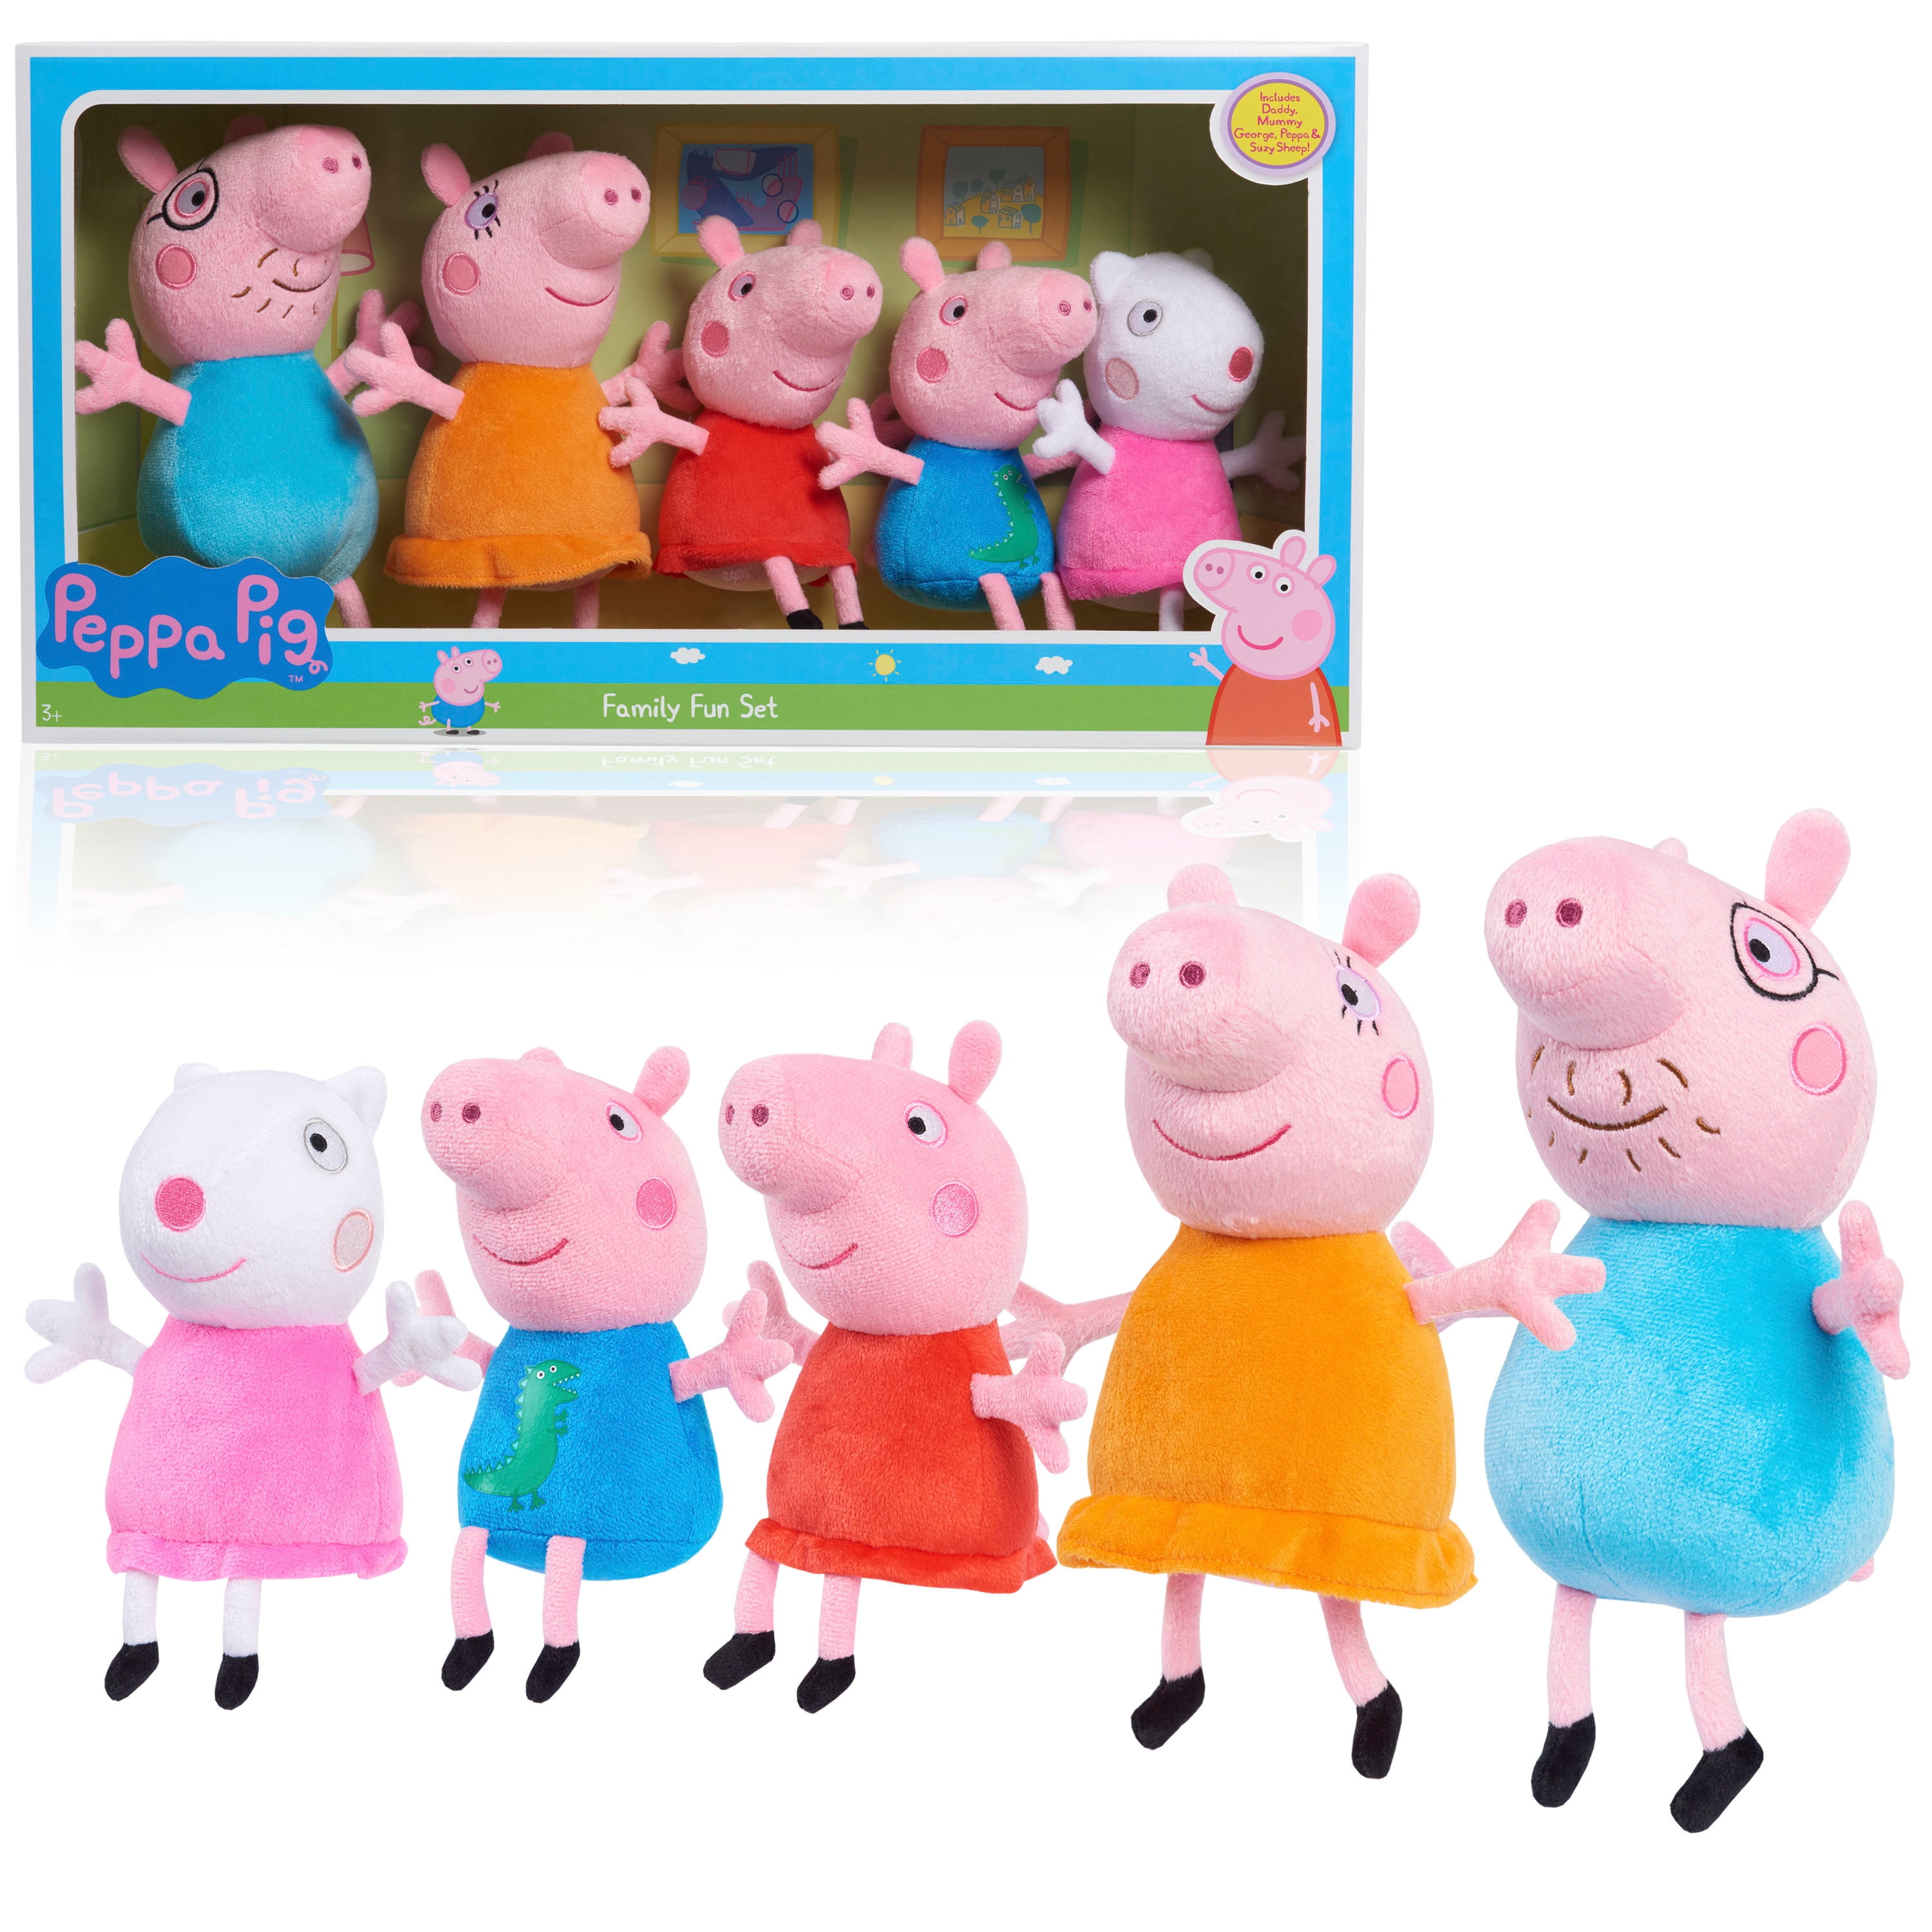 30cm Peppa Pig Full Family George Daddy Mummy Plush Soft Cute toy Gifts Figures